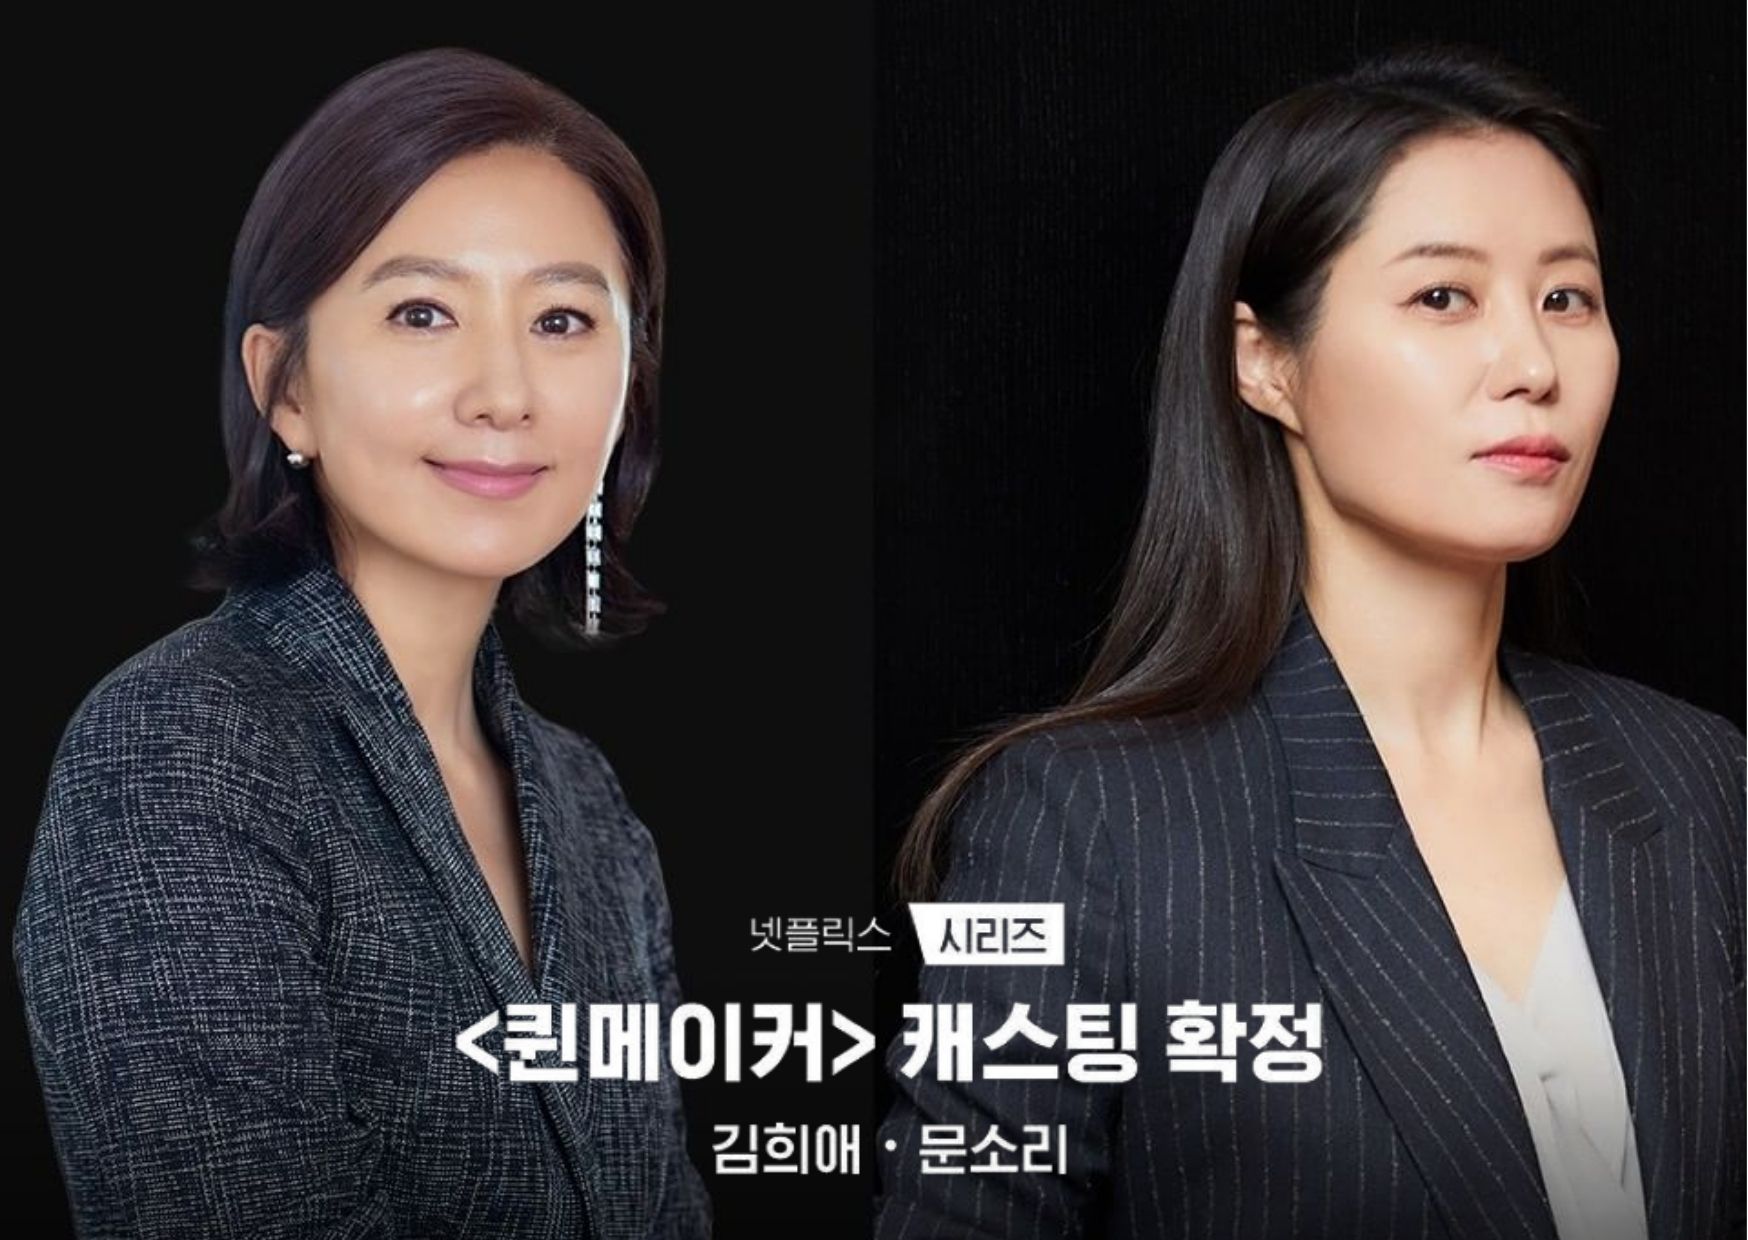 Strong Female Heroines To Star On Netflix's "Queenmaker" kdramadiary